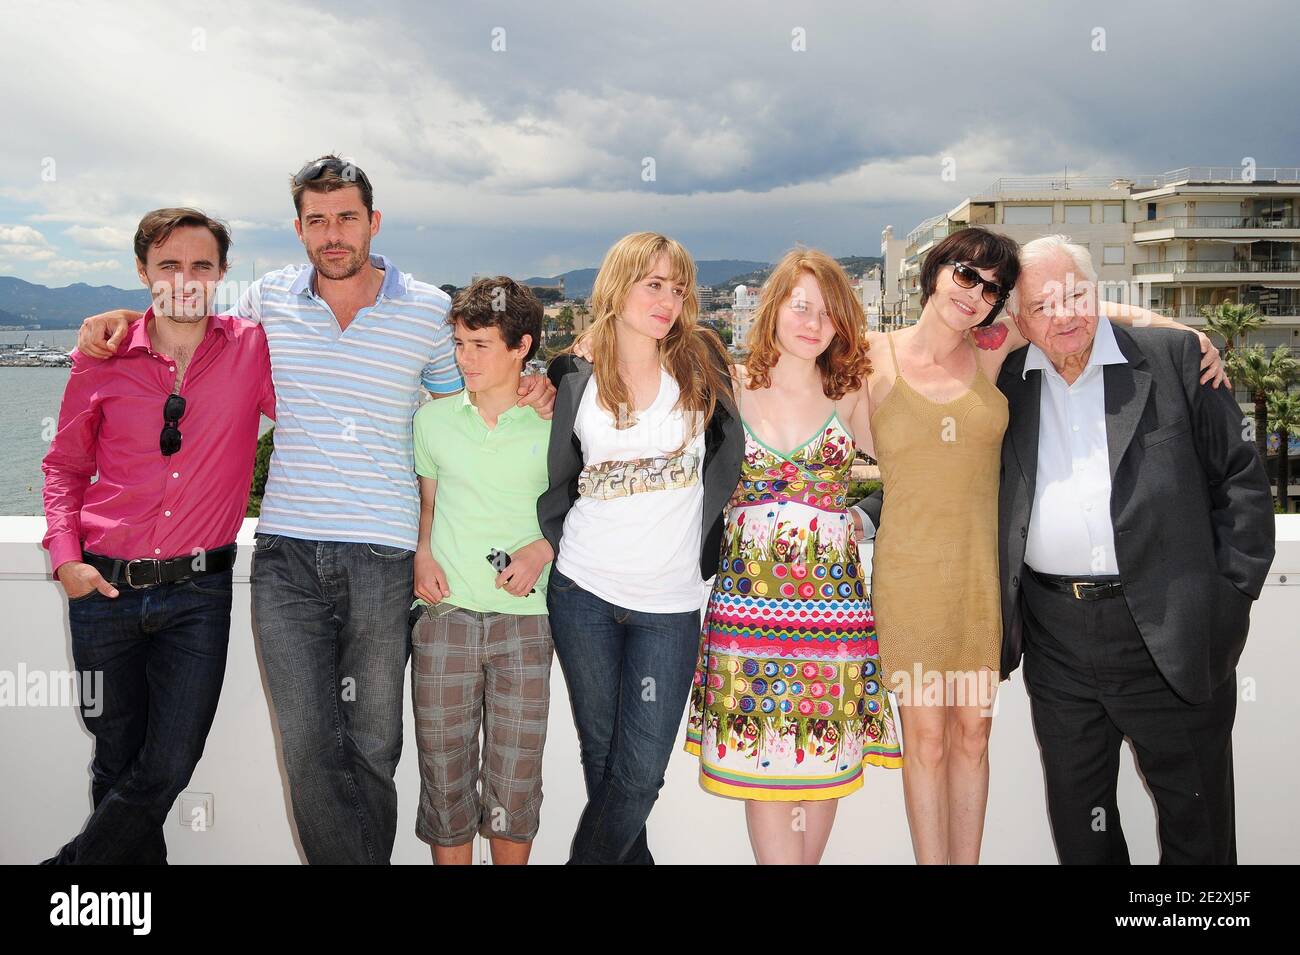 Stefano Cassetti, Thierry Neuvic, Katell Quillevere, Clara Augarde, Lio and Michel Galabru attending 'Un Poison Violent' Photocall held at the Terrasse de la Quinzaine during the 63rd Annual Cannes Film Festival in Cannes, France on May 15, 2010. Photo by Nicolas Briquet/ABACAPRESS.COM Stock Photo